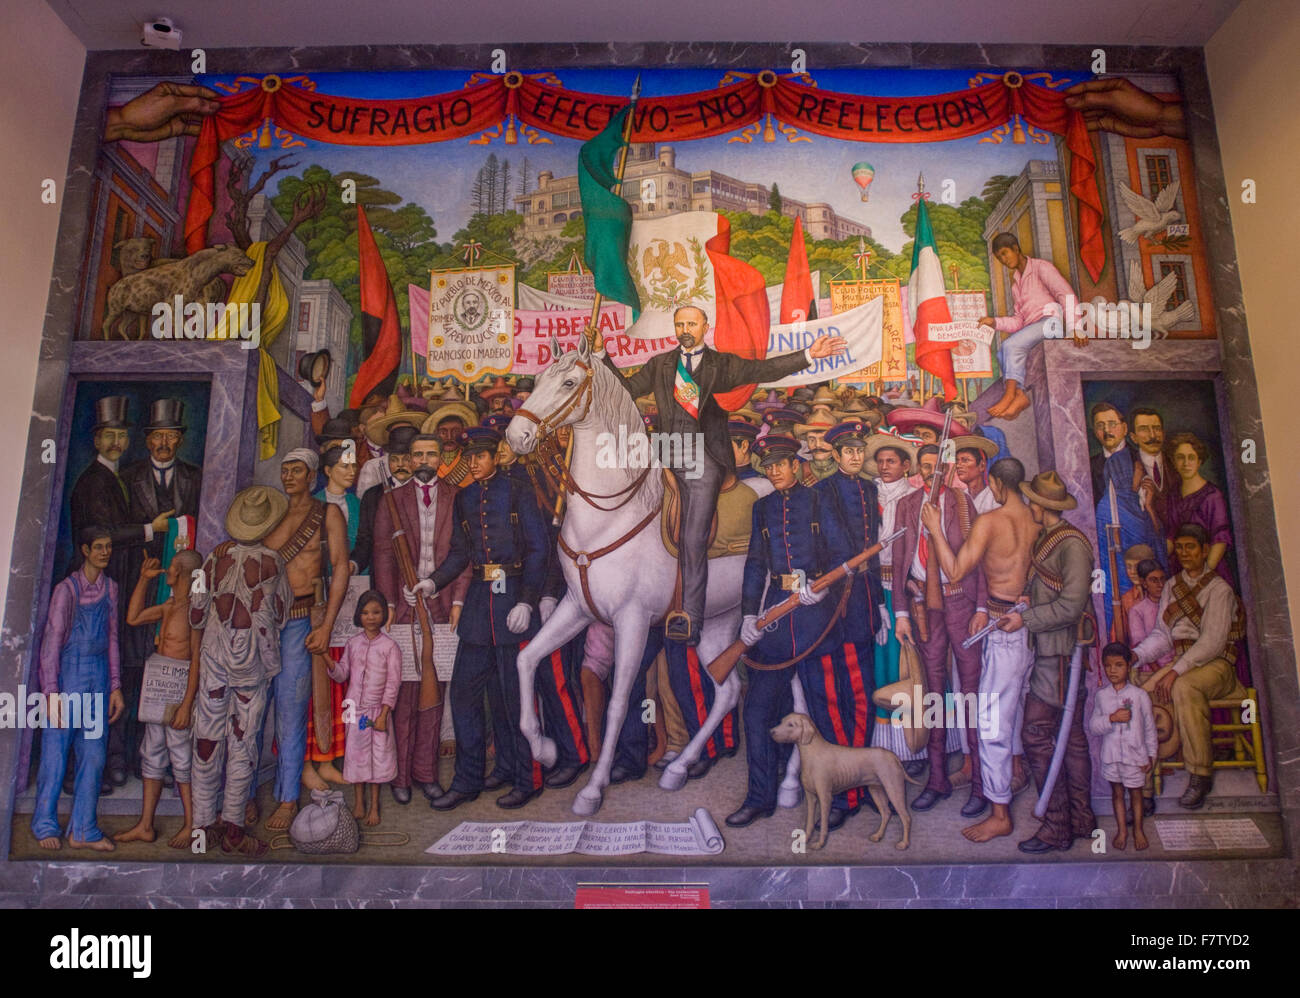 “Sufragio efectivo, no reeleccion' mural (1969) by Juan O'Gorman in the Museum of National History in Chapultepec Castle, Mexico Stock Photo